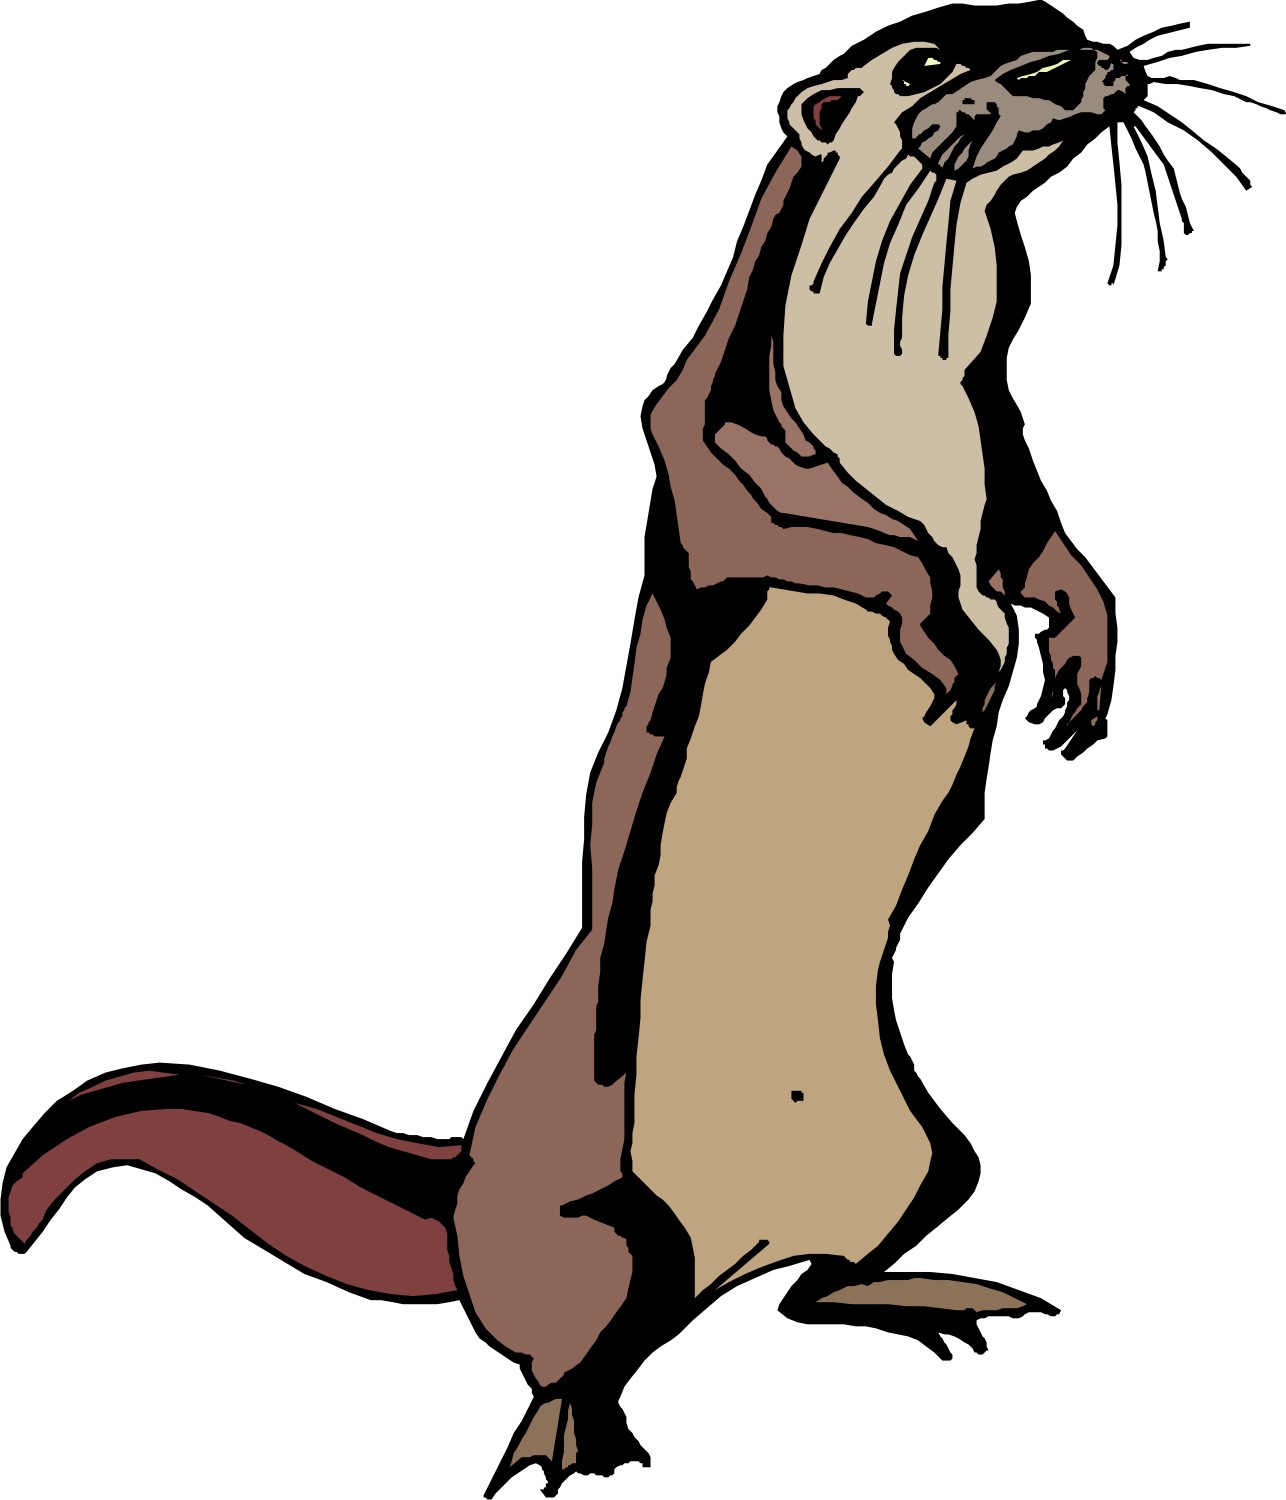 Mongoose clipart #1, Download drawings